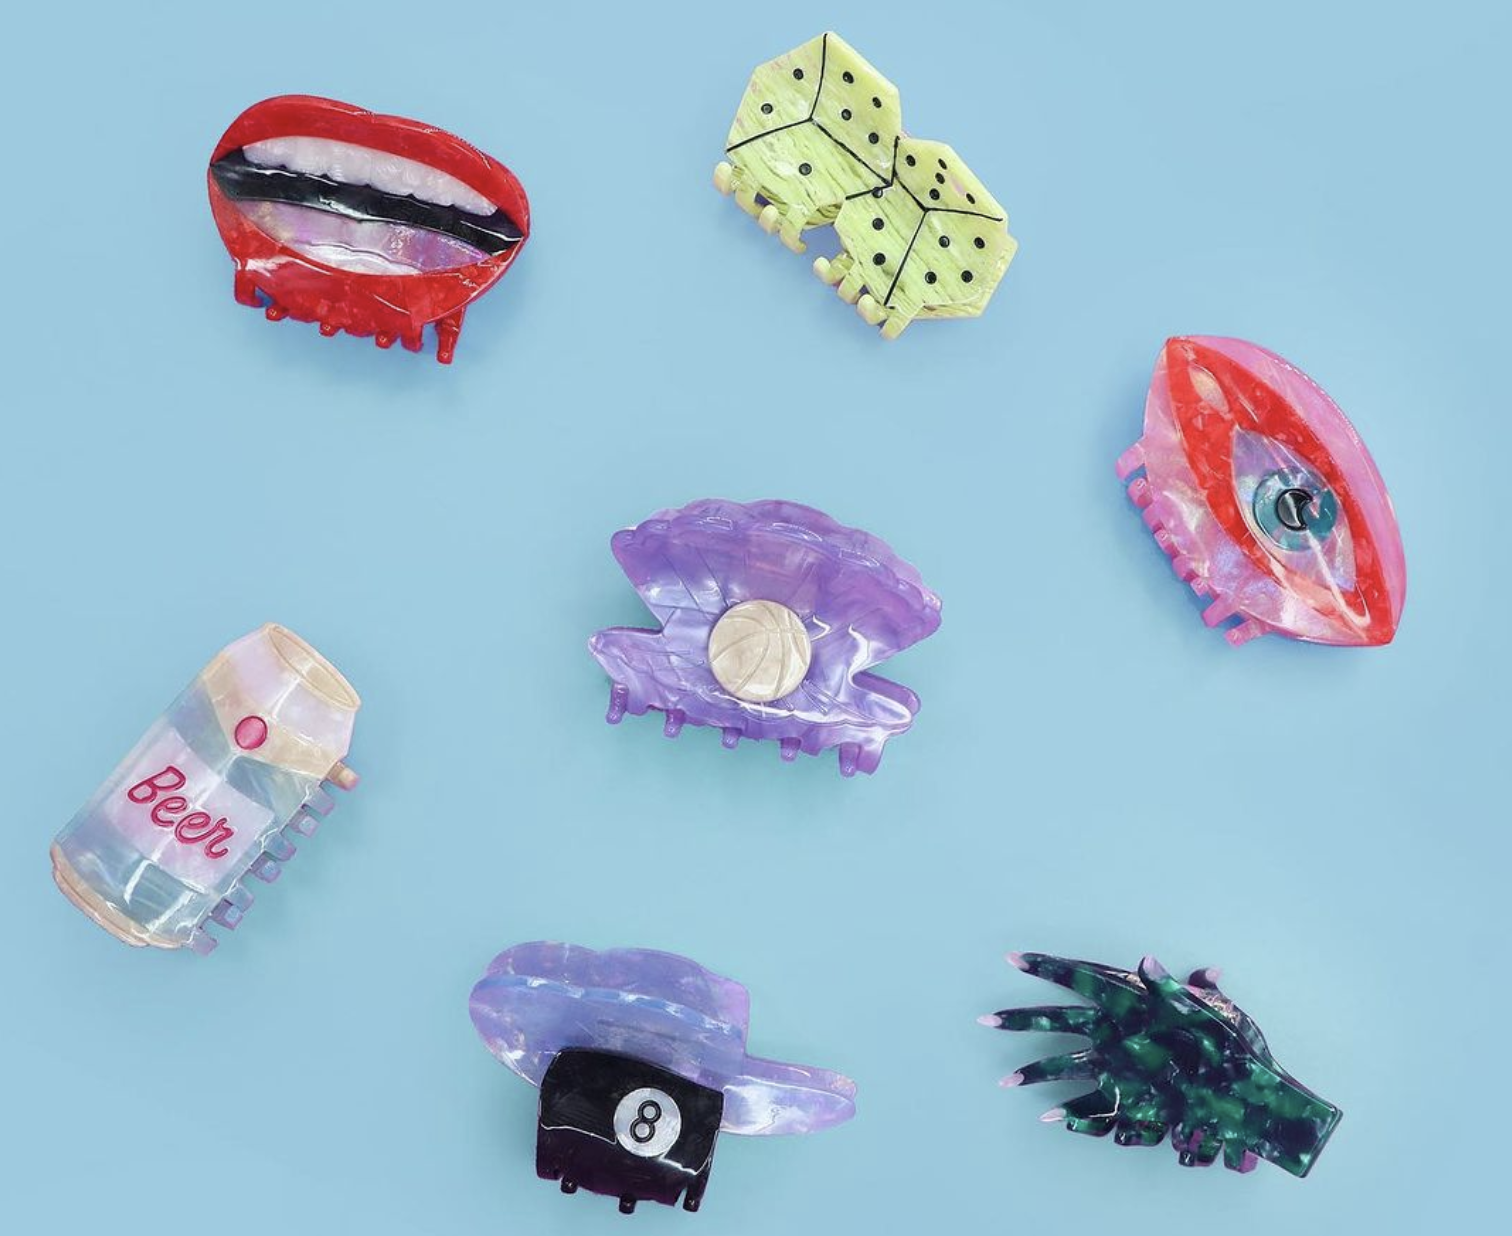 Various custom-made hair clips are laid out on a neutral background. Clips include shapes like red lips, rolled dice, 8-ball, evil eye, etc.